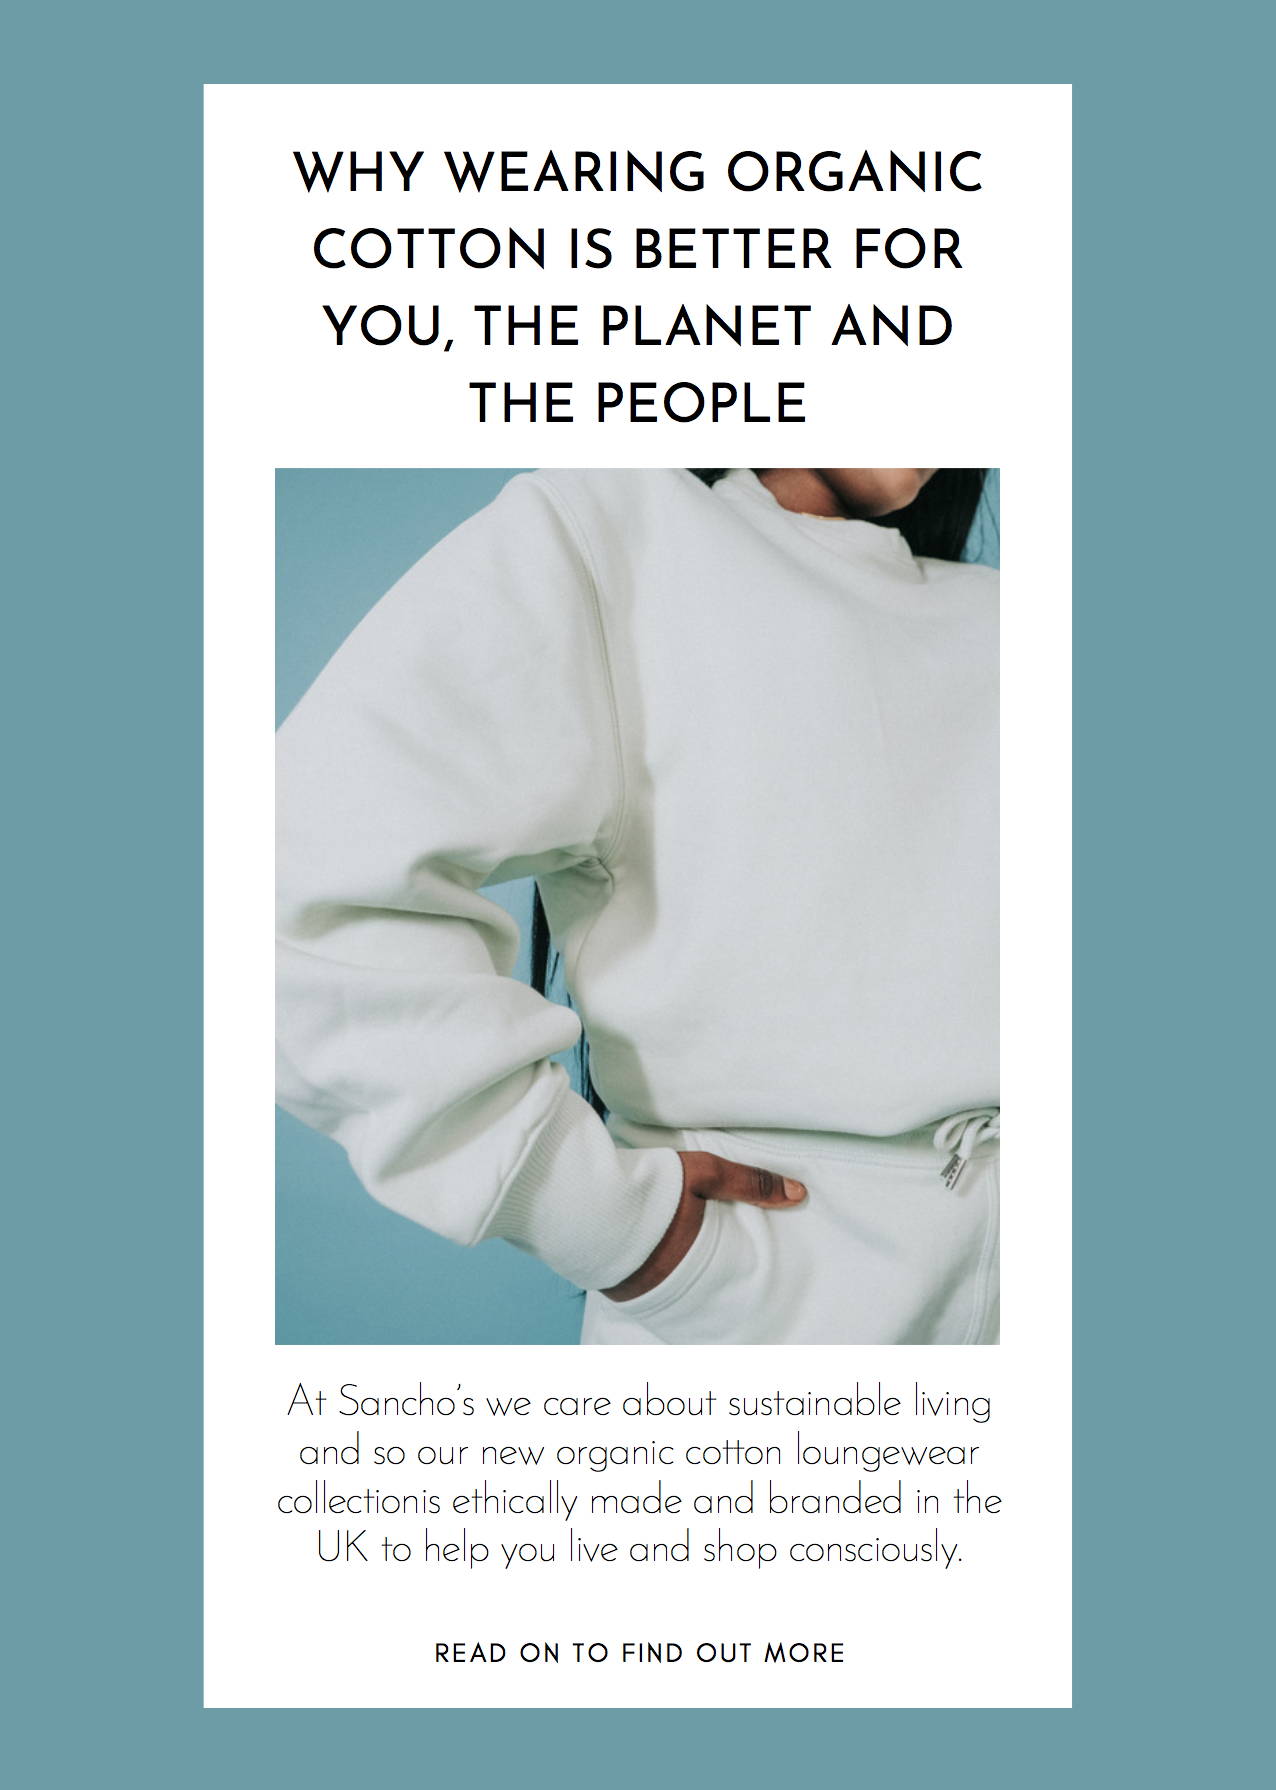 Why wearing organic cotton is better for you, the planet and the people